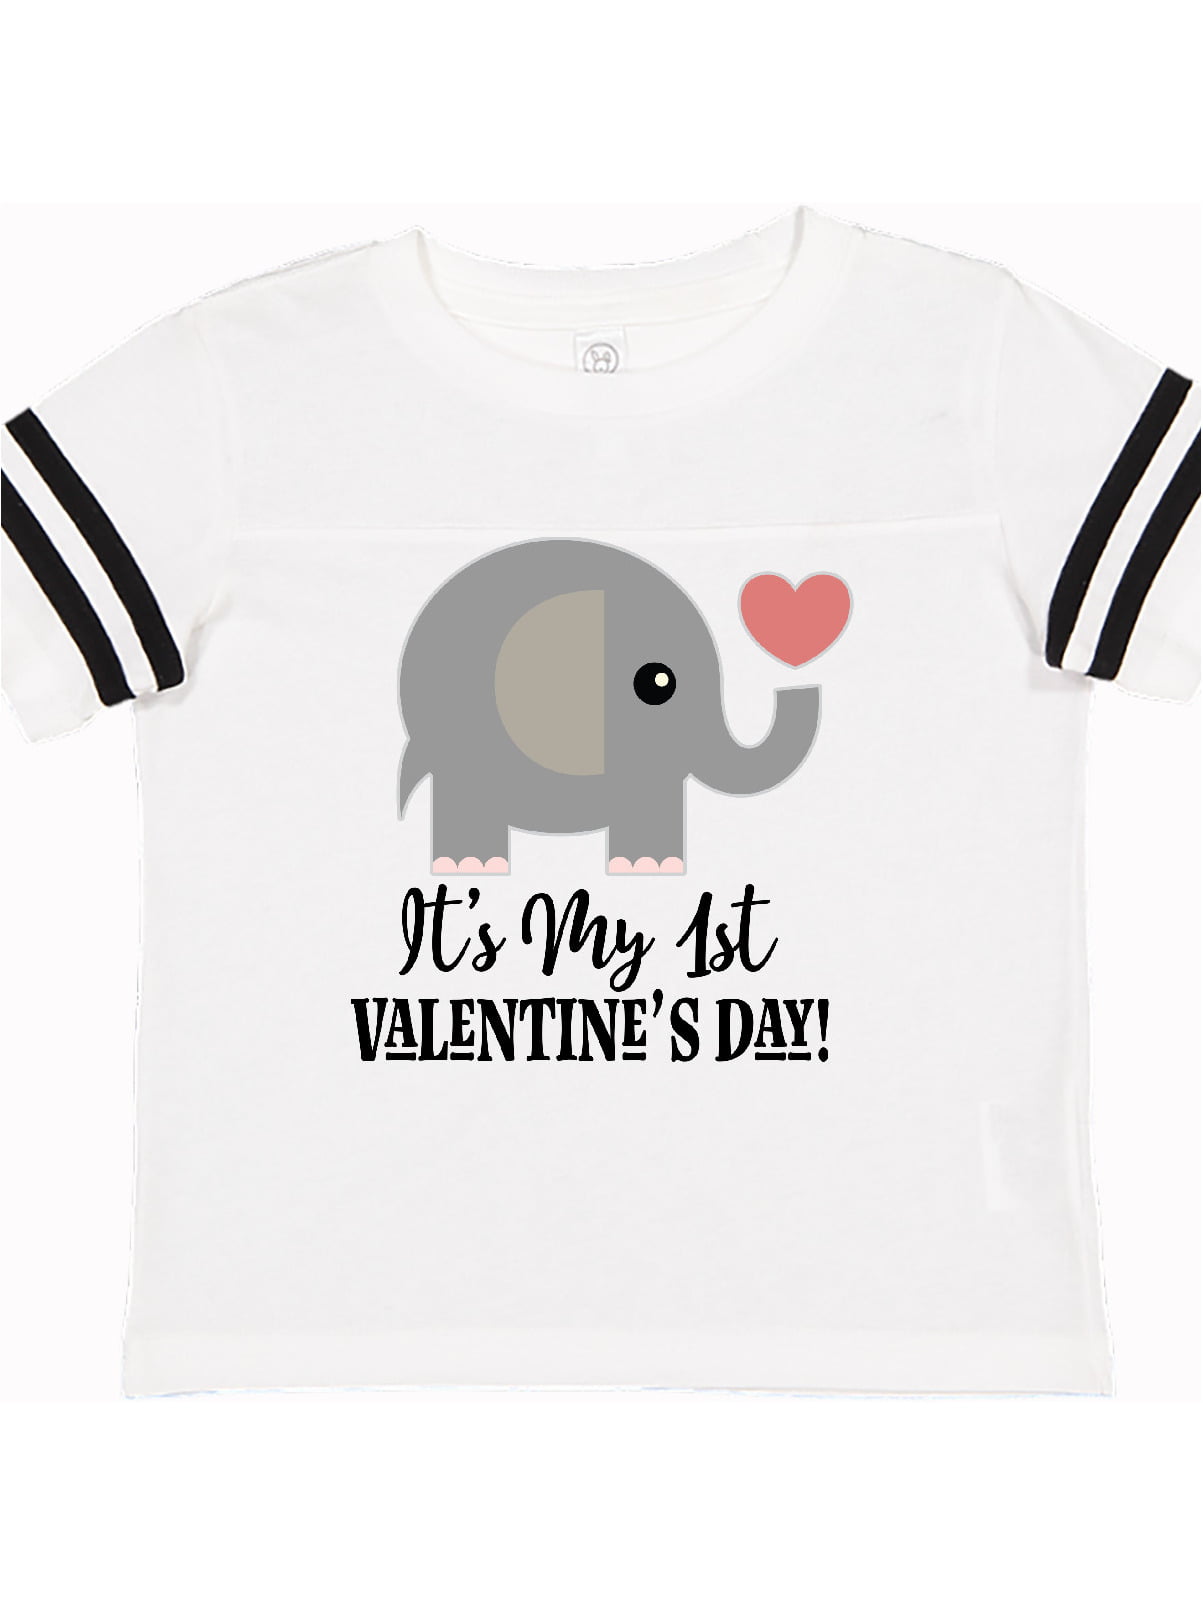 INKtastic - 1st Valentines Day Baby Elephant Toddler T ...